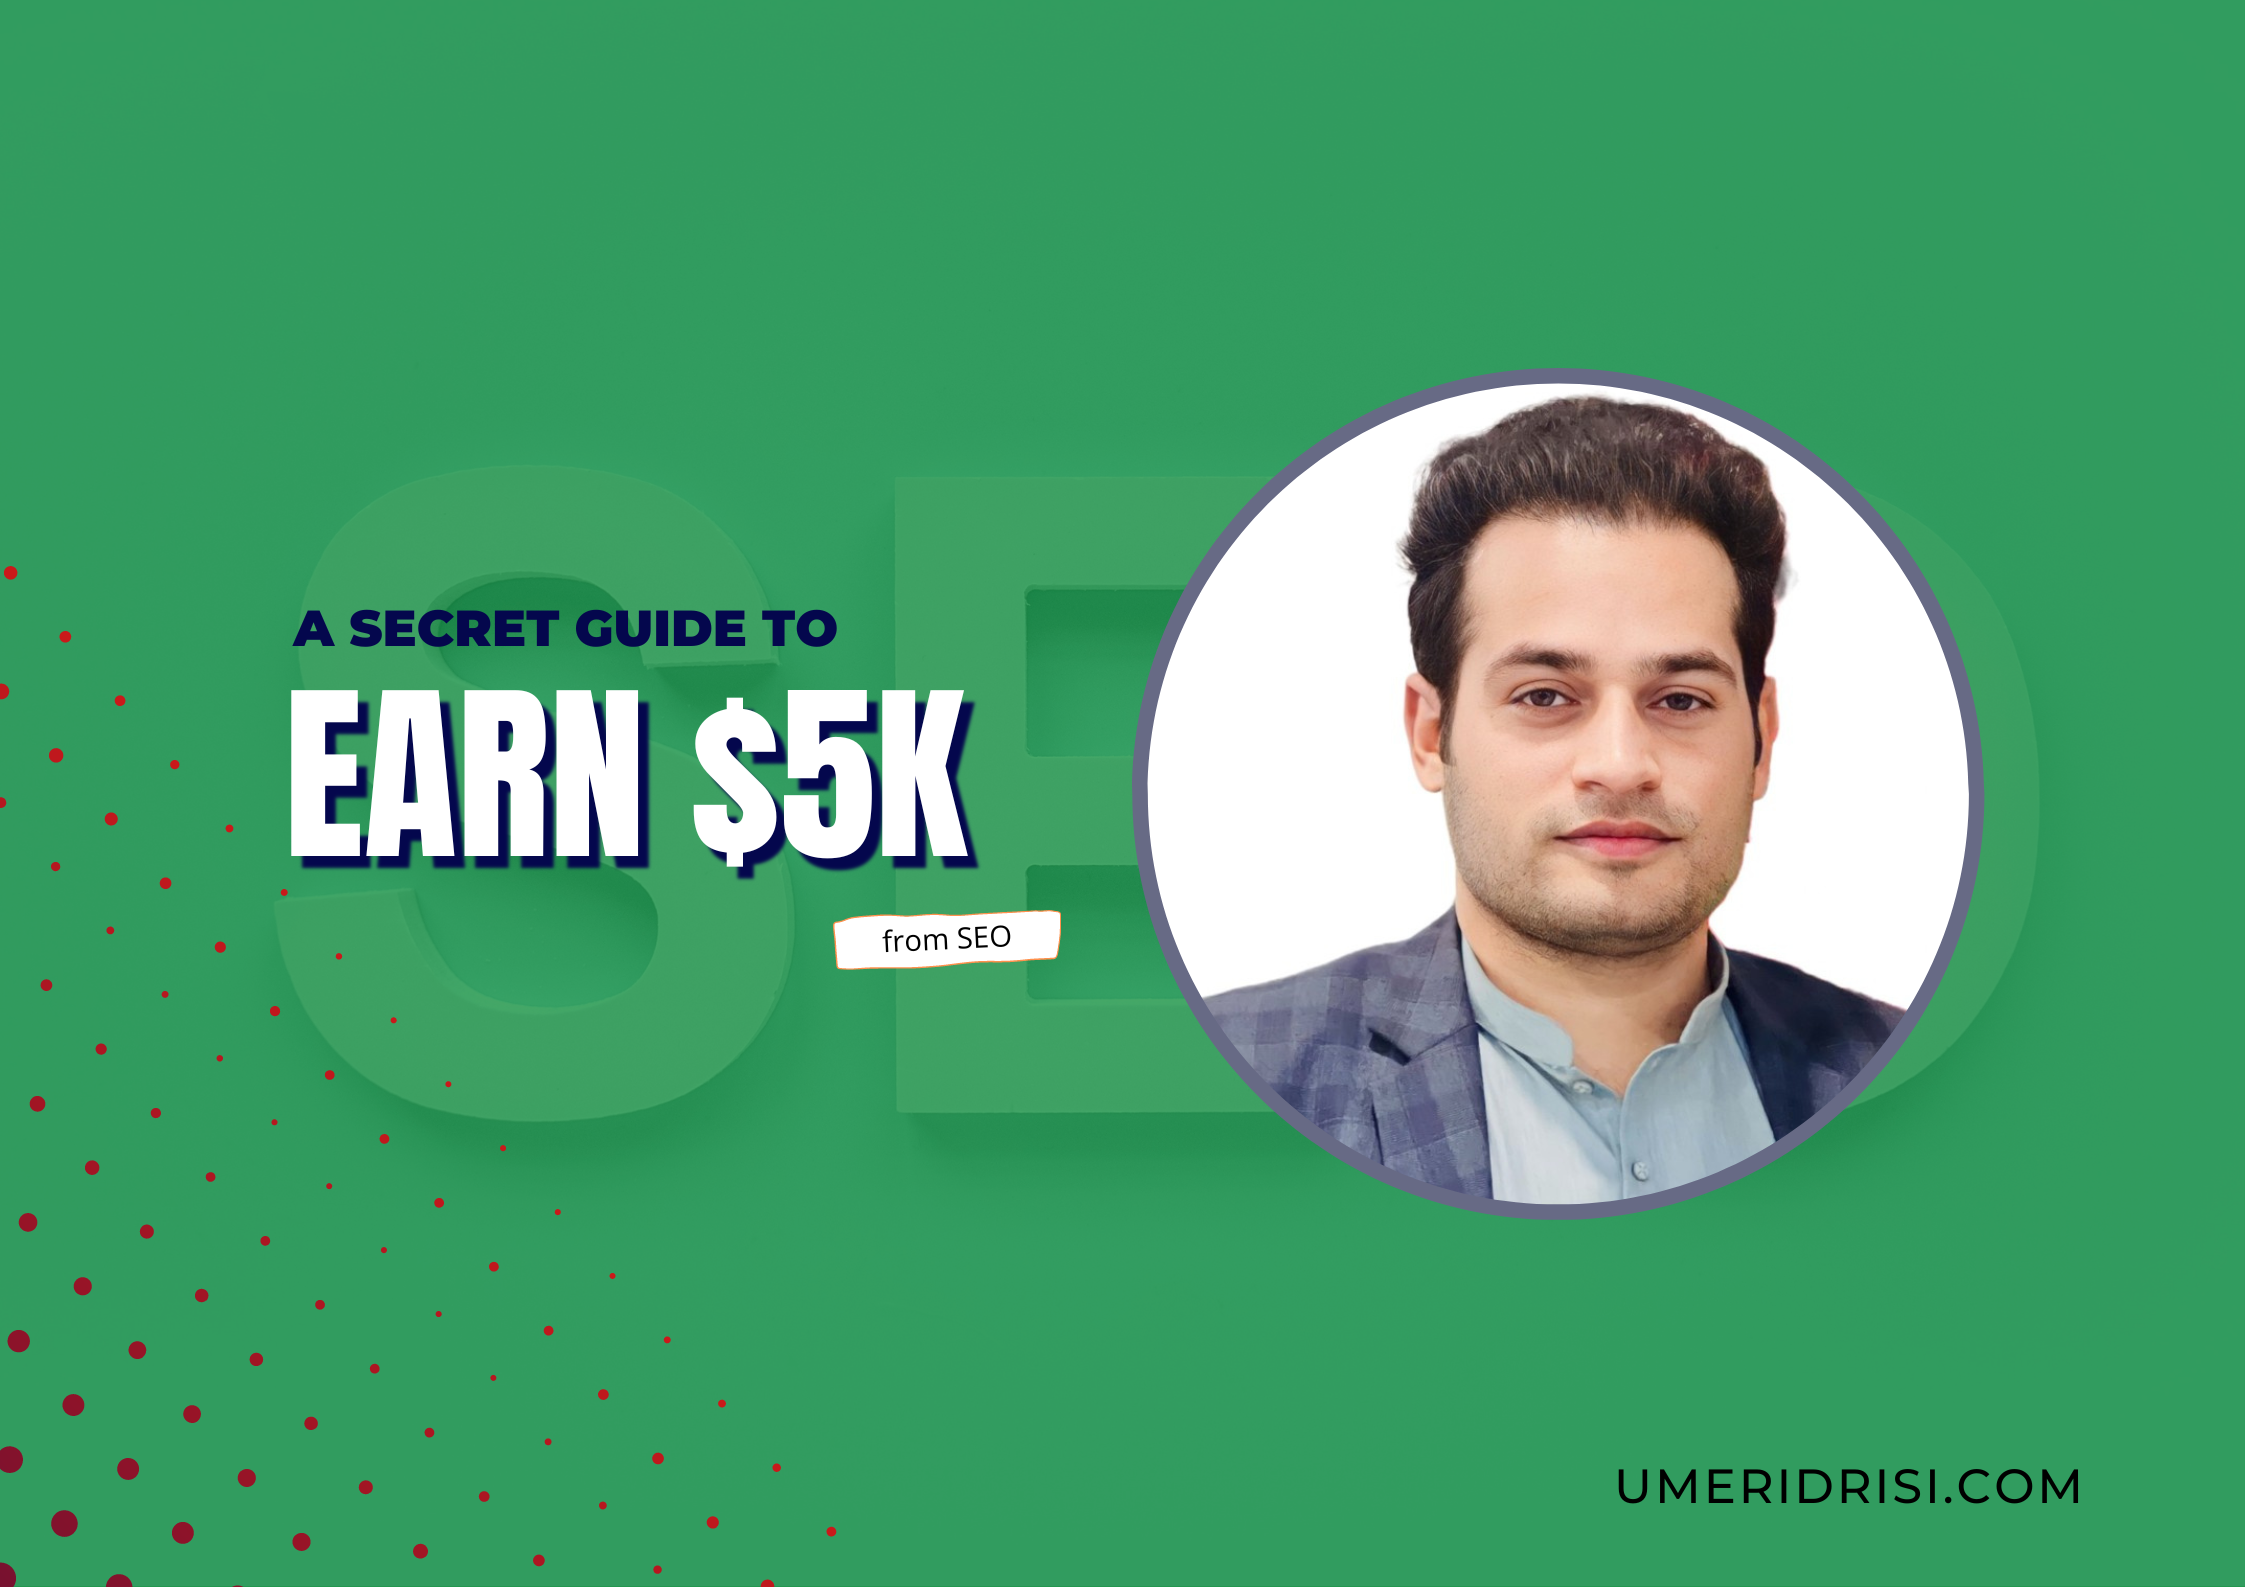 A Secret Guide to Earning $5,000+ with SEO